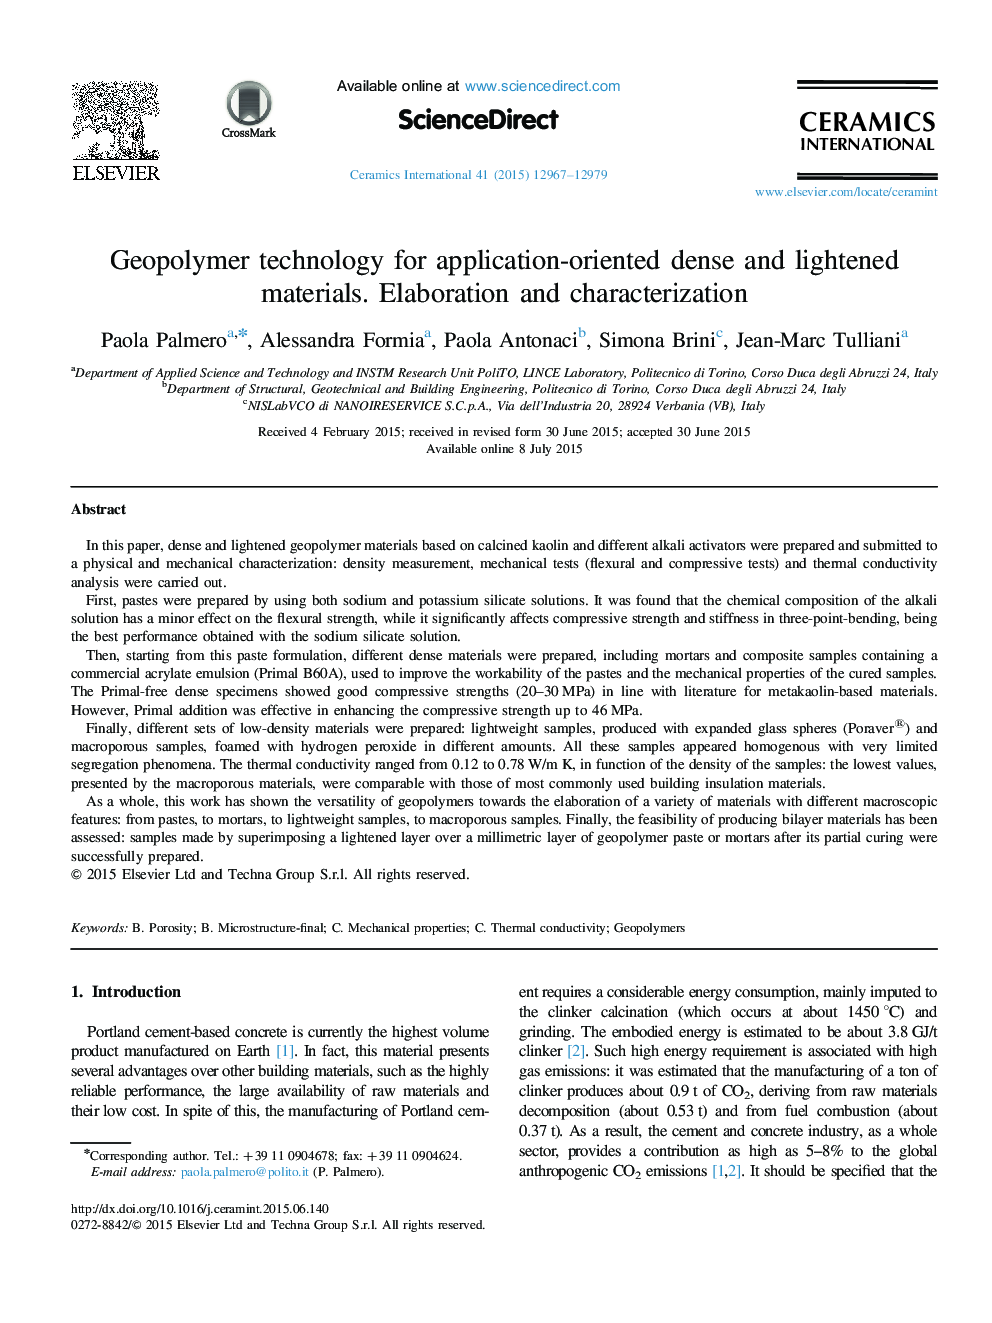 Geopolymer technology for application-oriented dense and lightened materials. Elaboration and characterization